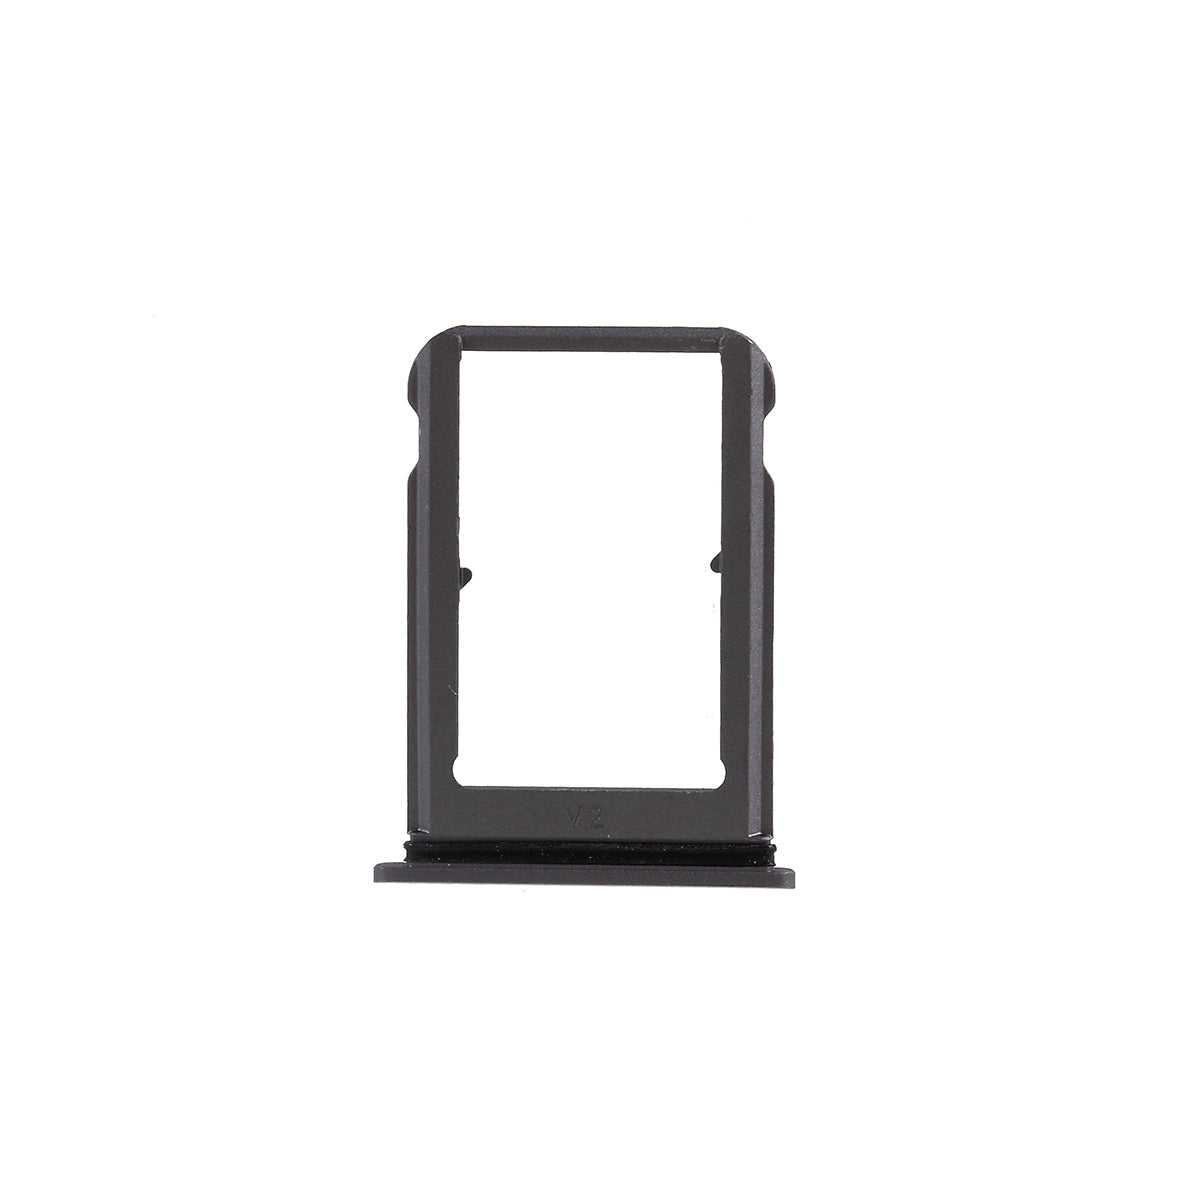 OEM Dual SIM Card Tray Holder Replace Part for Xiaomi Mi 9 - Black